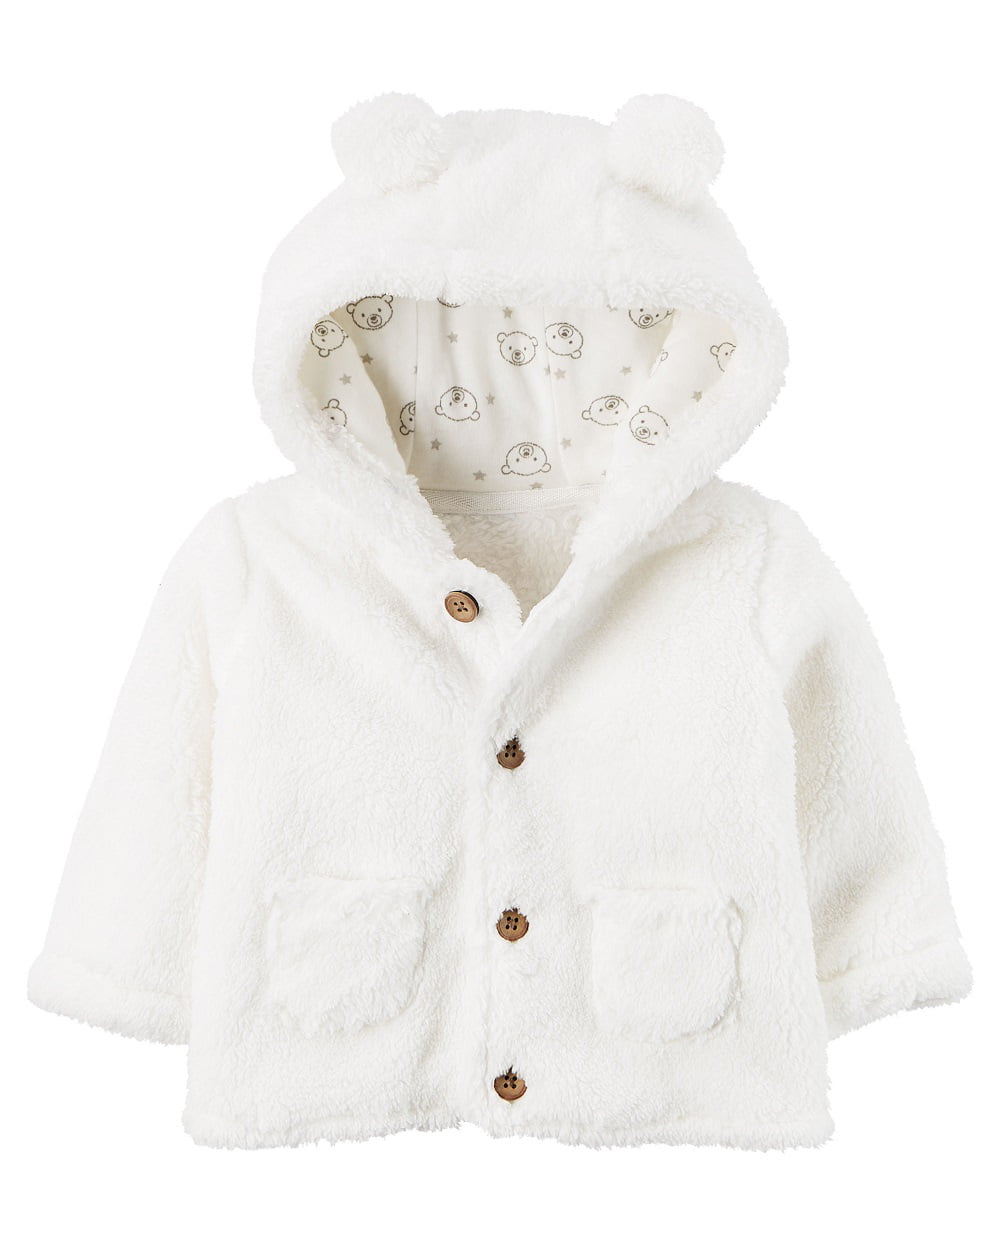 Carter's Carter's Baby Boys' Sherpa Hooded Jacket, White, 18 Months